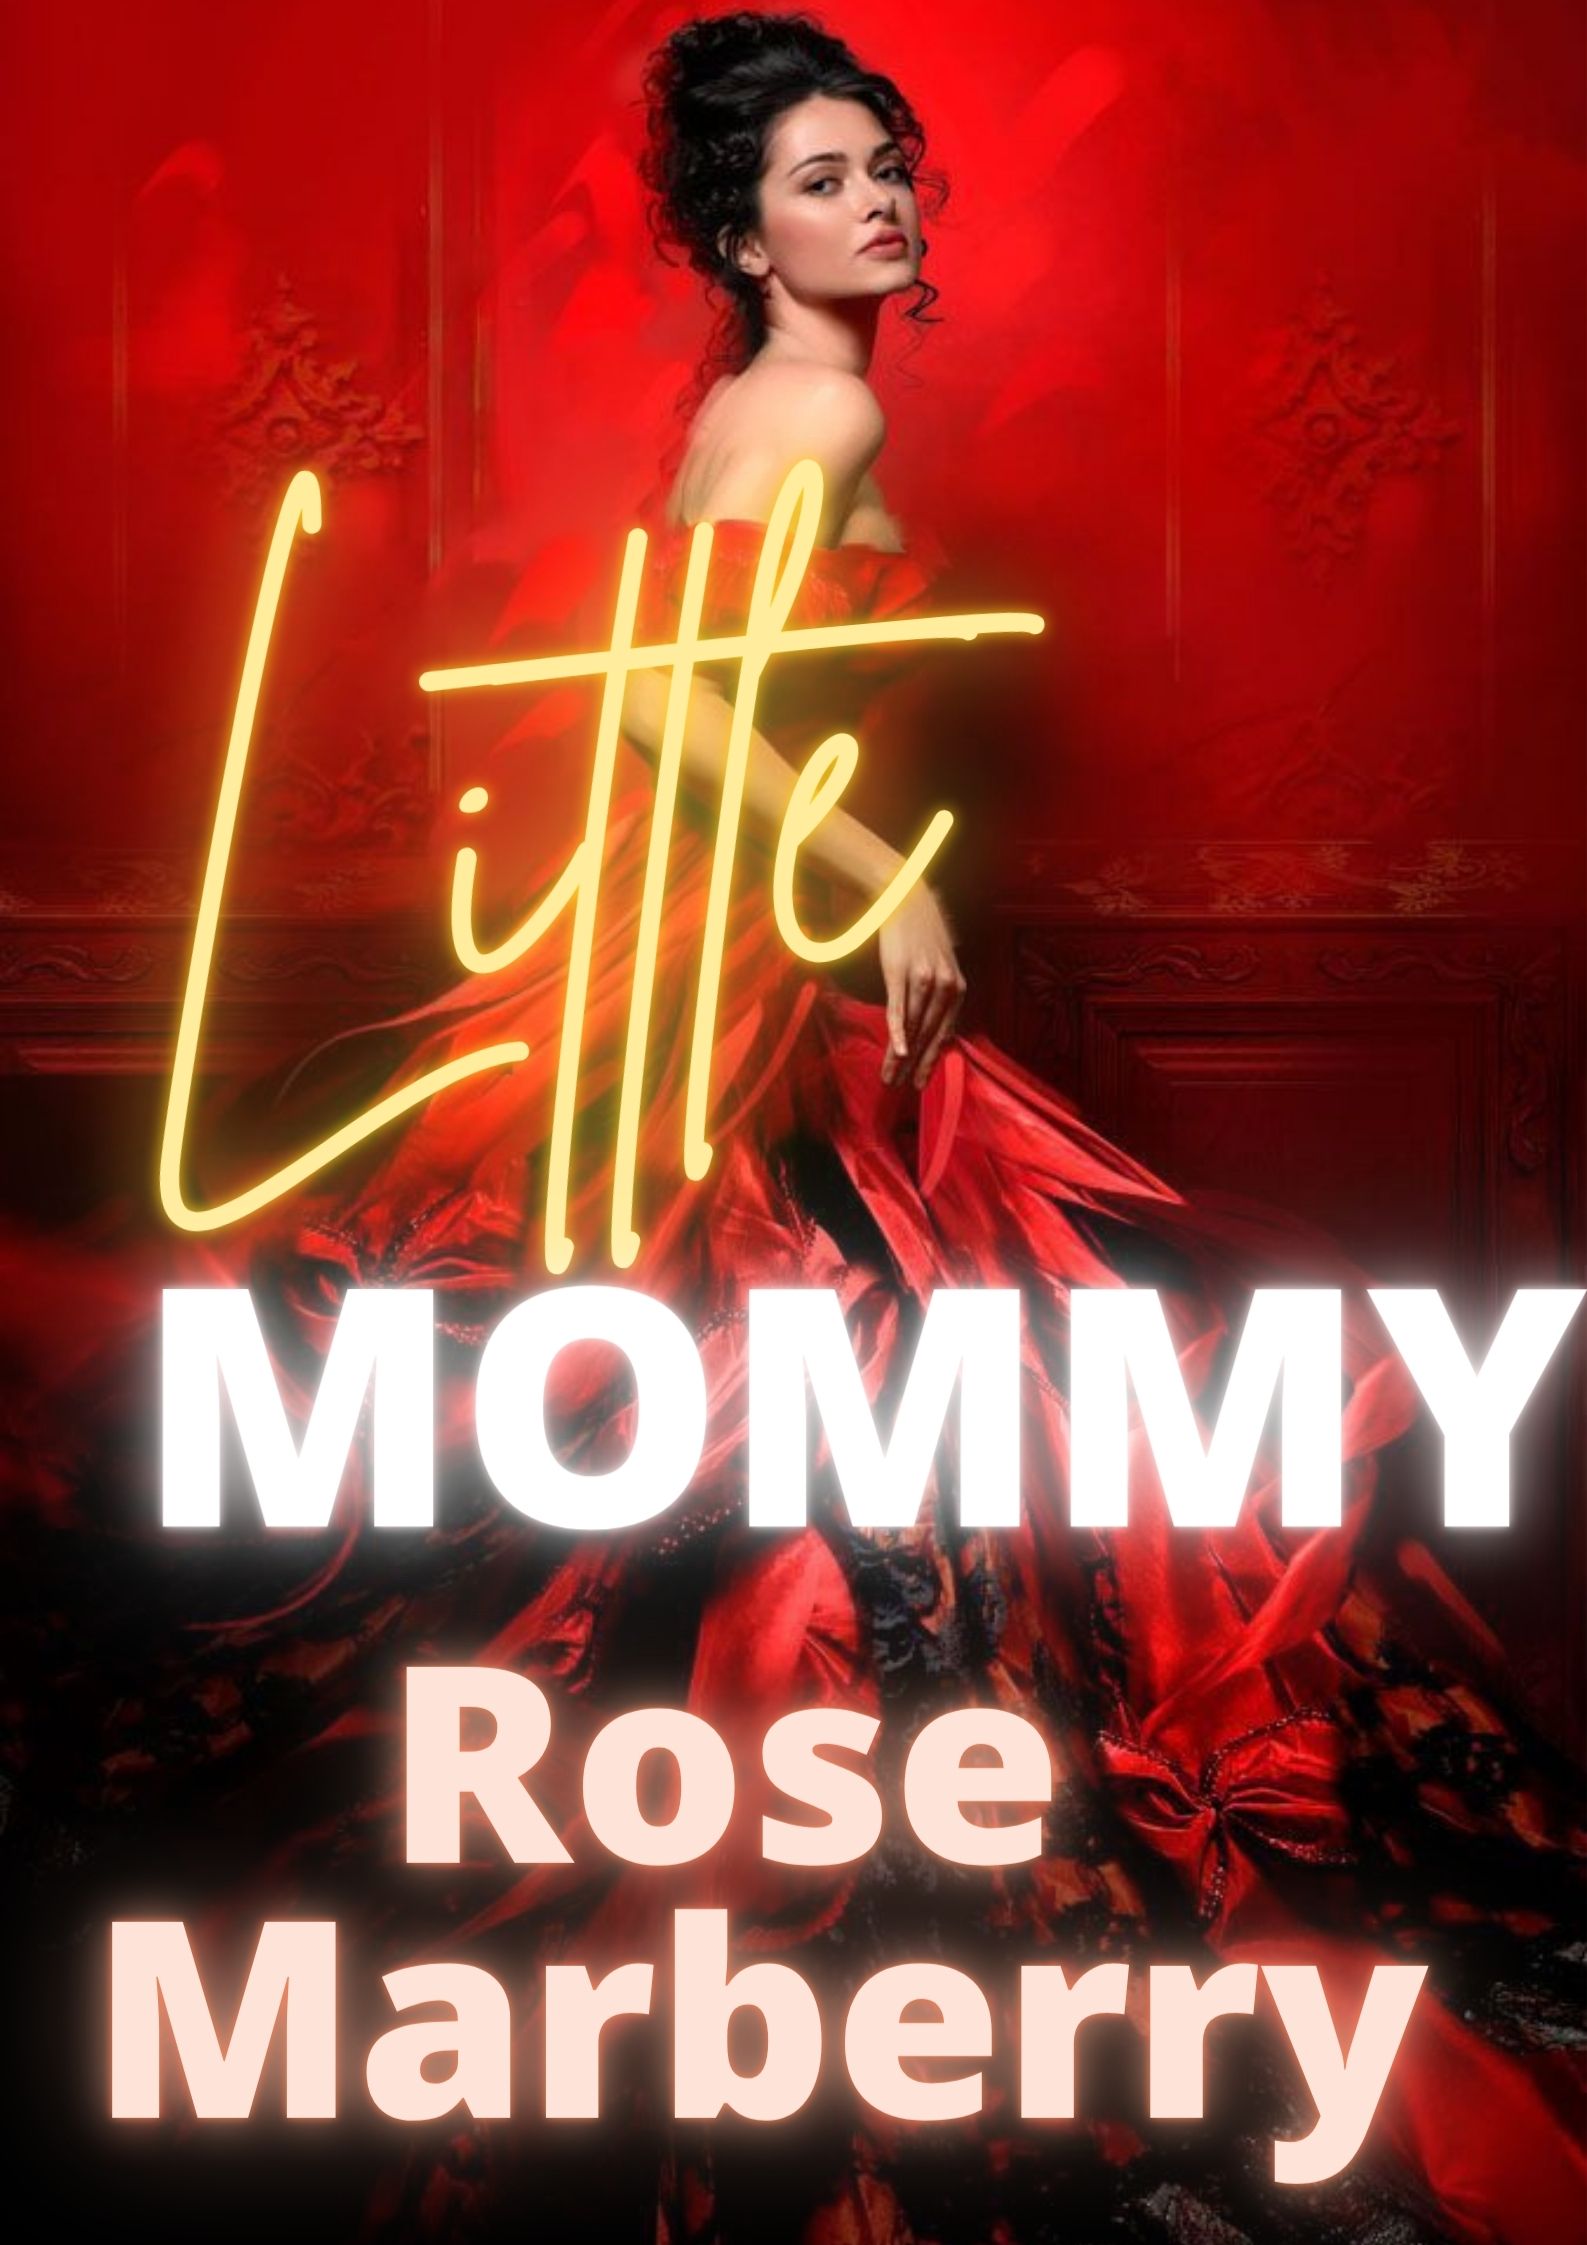 LITTLE MOMMY By Rose Marberry | Libri